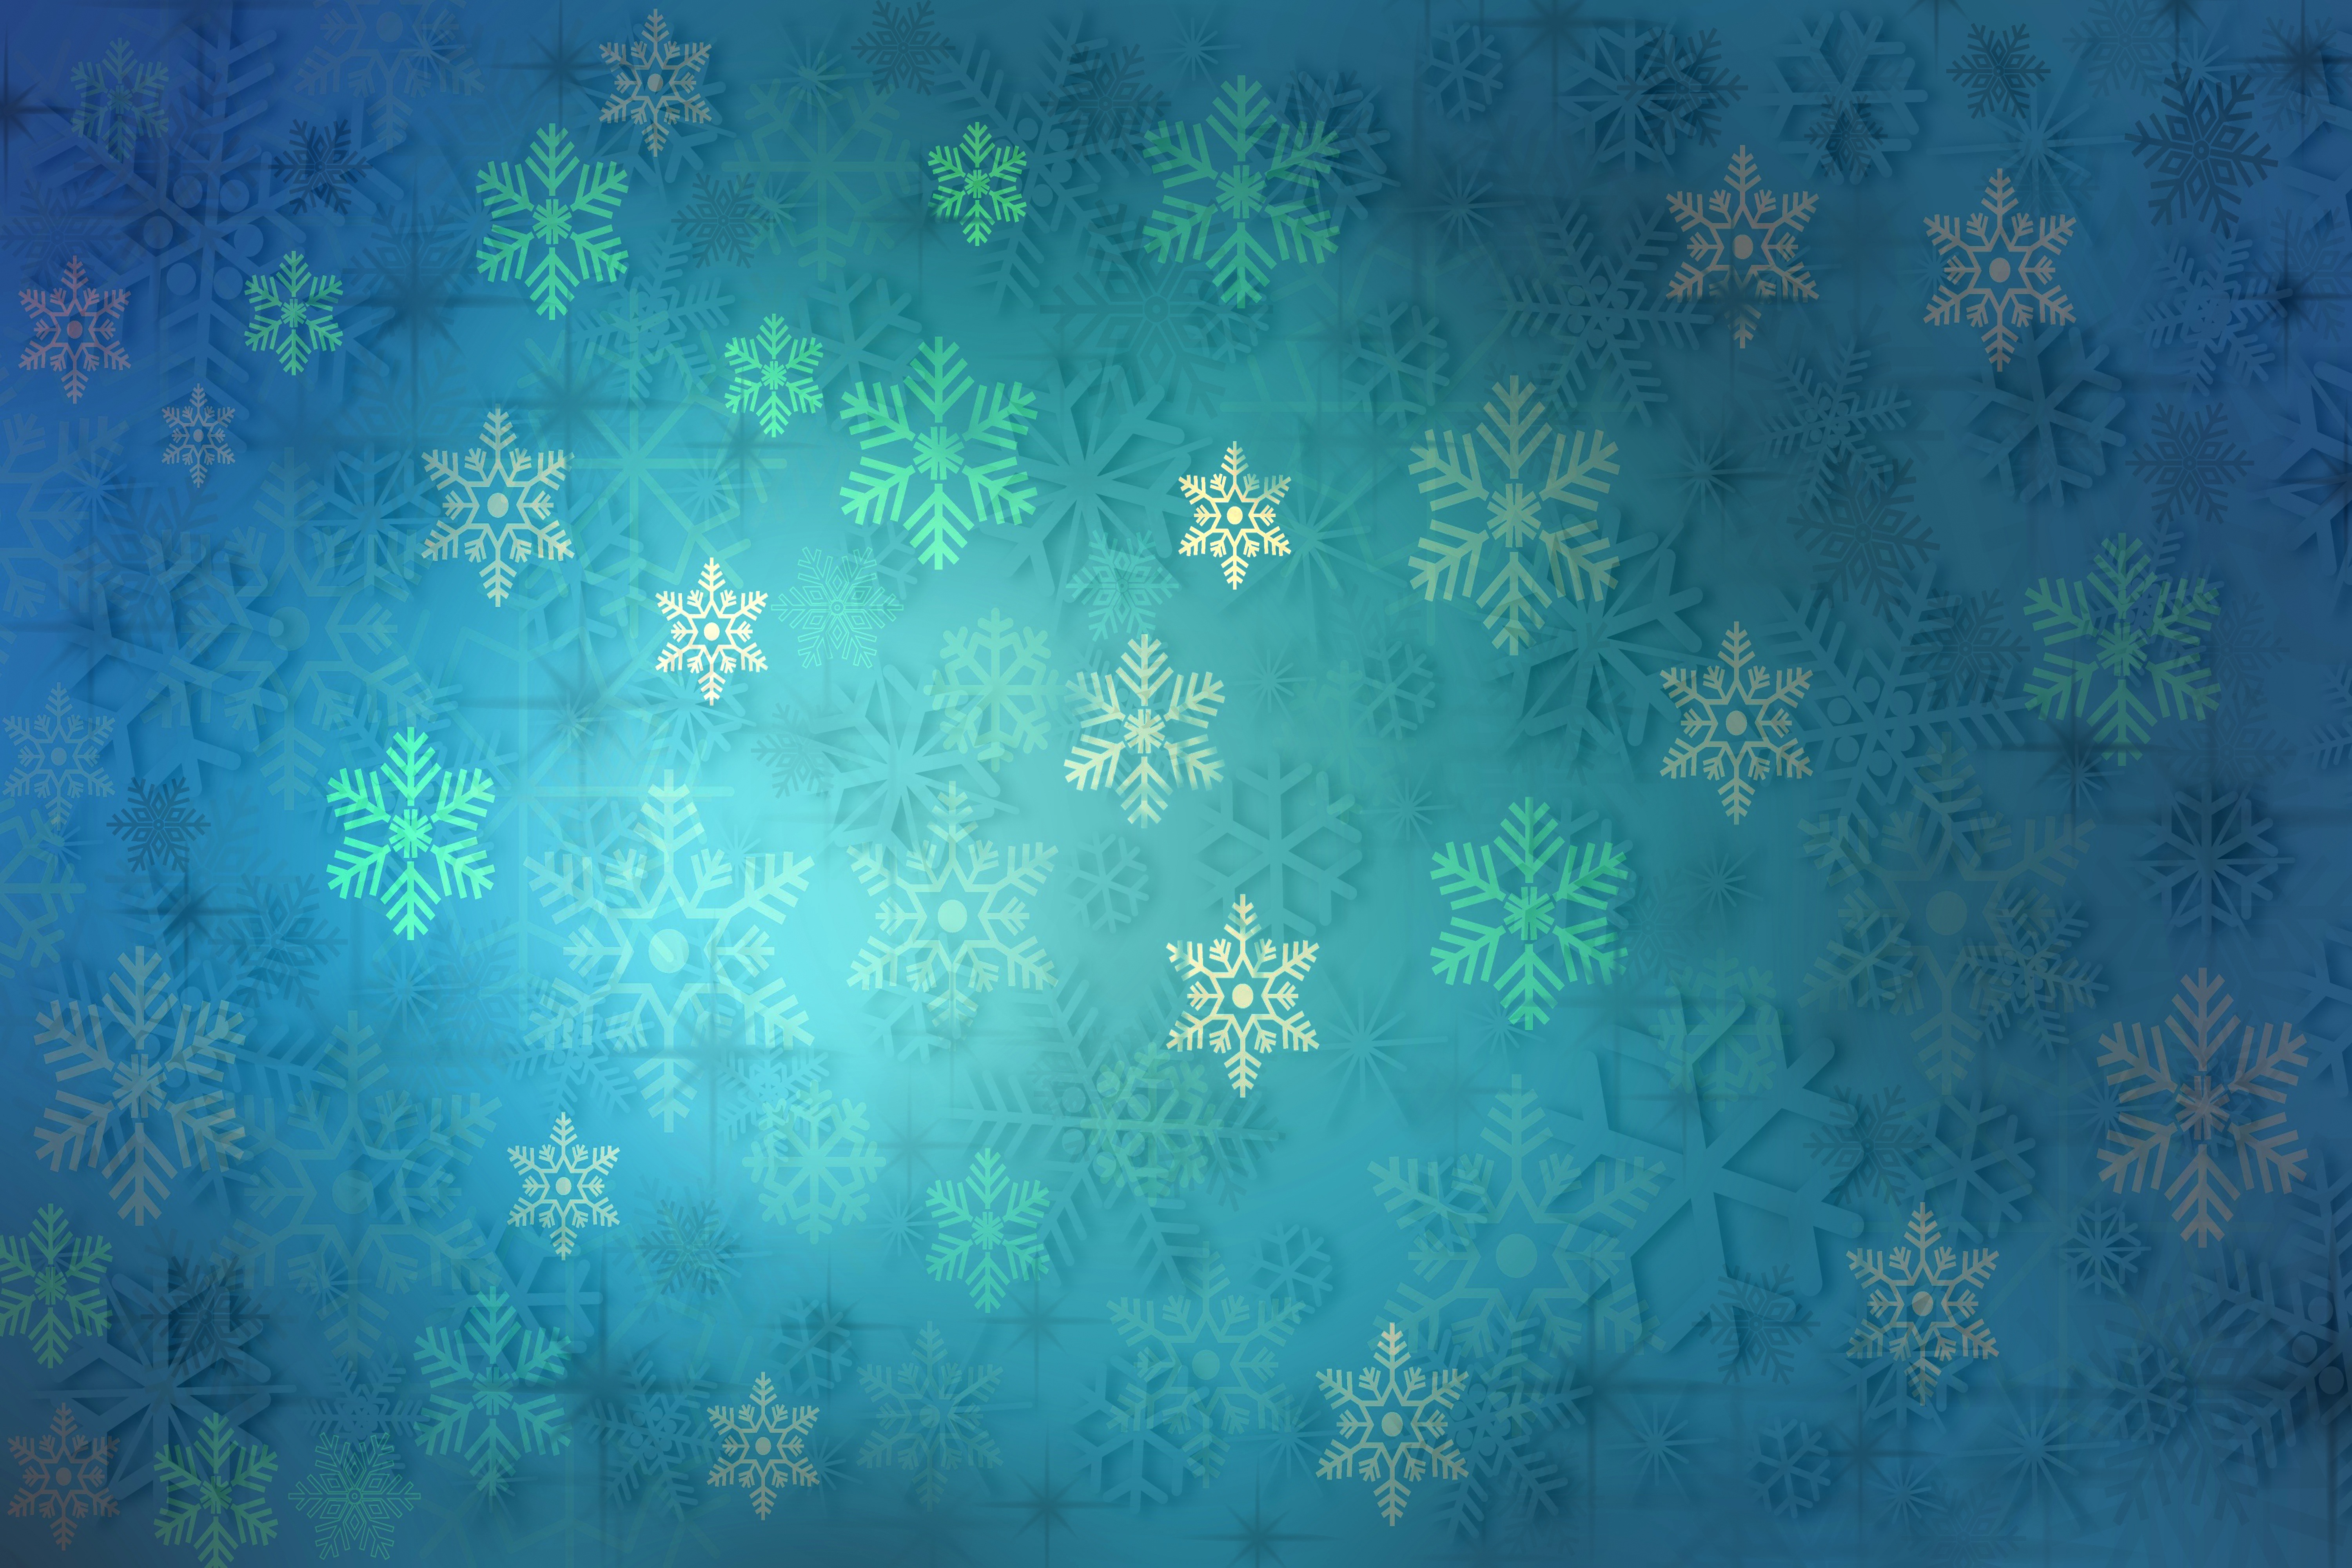 texture, pattern, snowflakes, new year, textures, christmas, blue, holiday cellphone